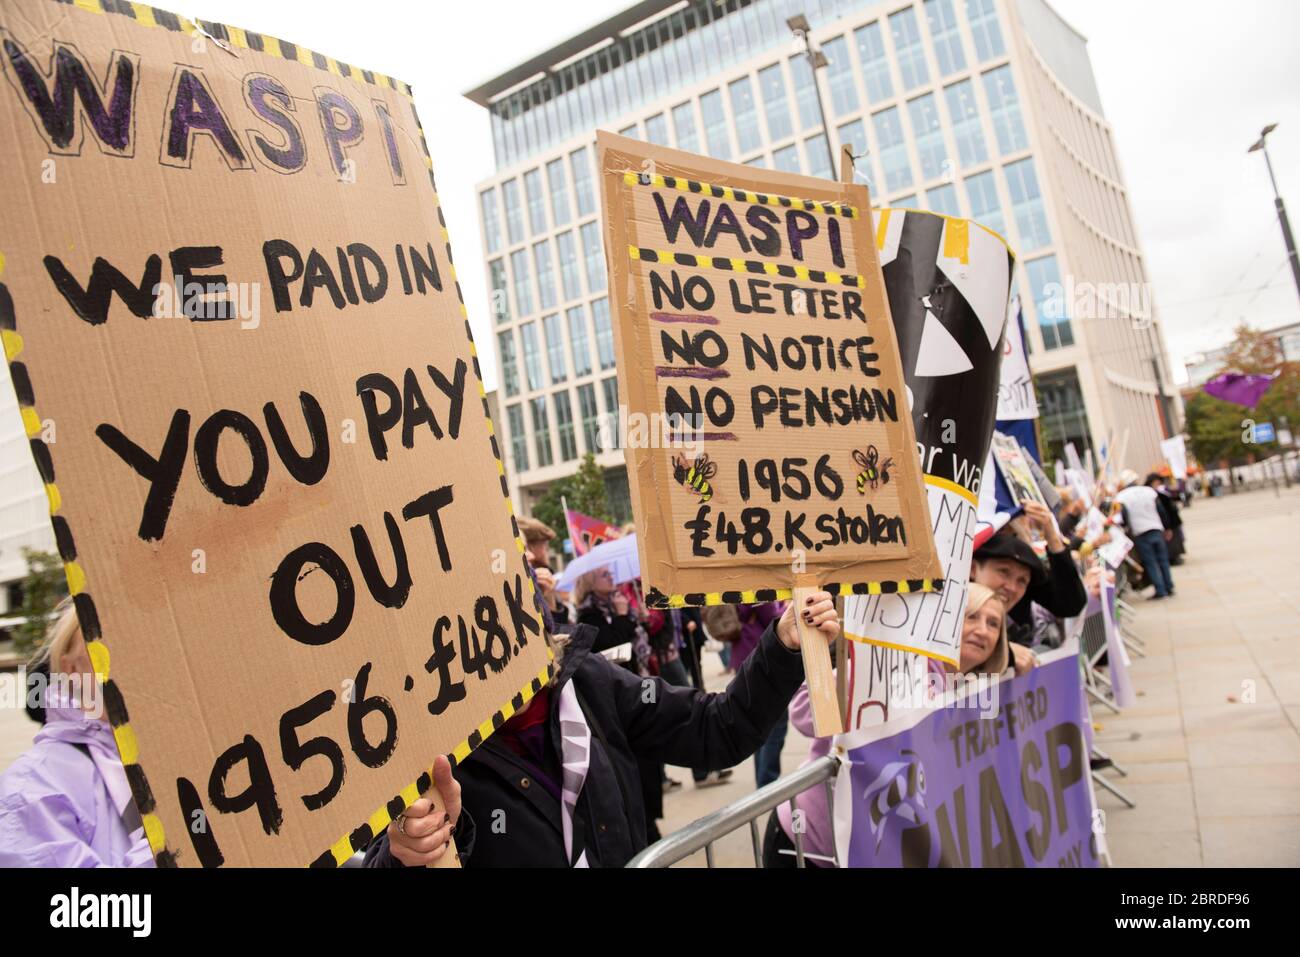 WASPI protestors hold banners and placards asking for equal pension rights for women - Women Against State Pension Inequality Stock Photo